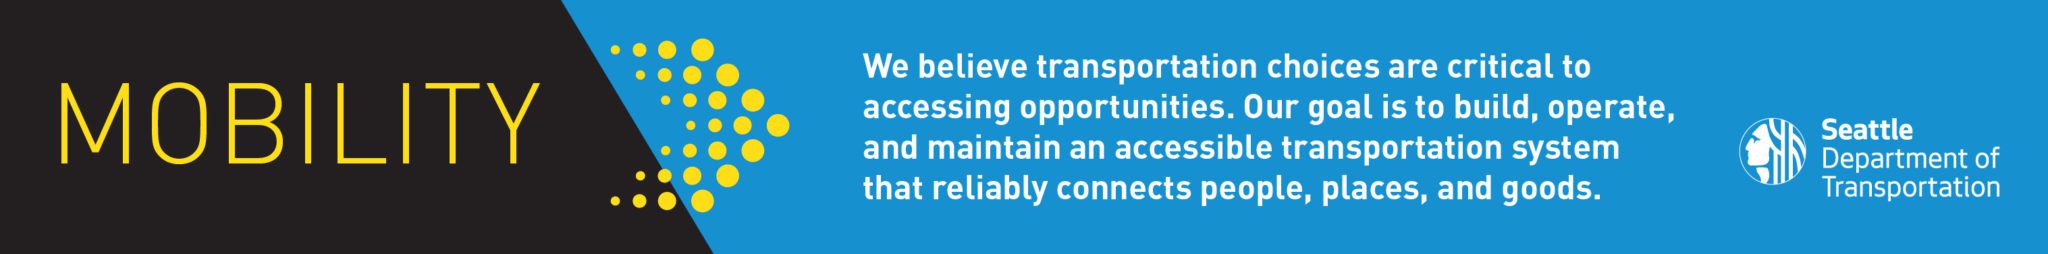 Mobility: We believe transportation choices are critical to accessing opportunities. Our goal is to build, operate, and maintain an accessible transportation system that reliably connects people, places, and goods.